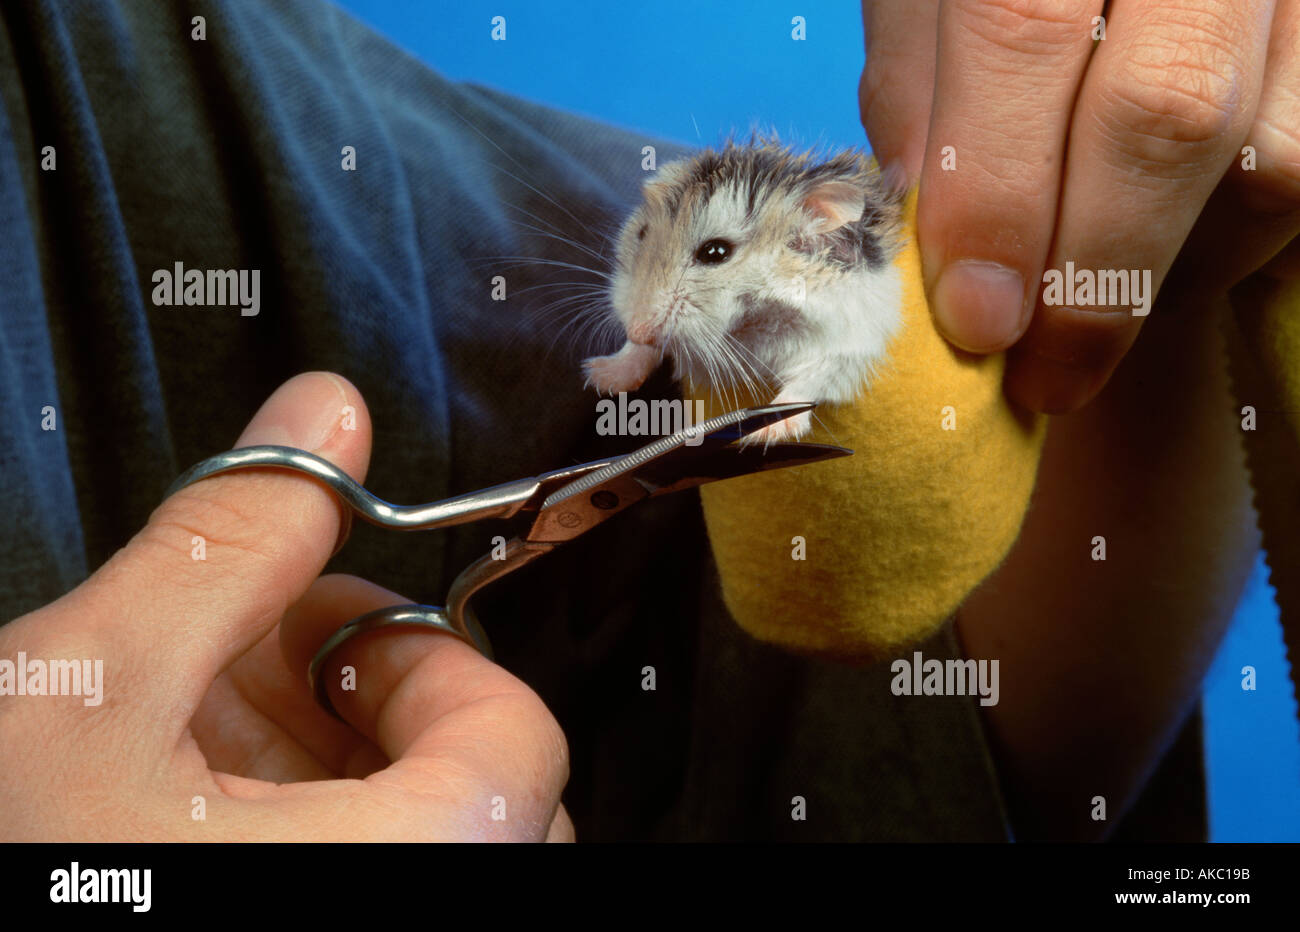 Roborowsky Hamster care hygiene nail clipping scissors nailcare Stock Photo